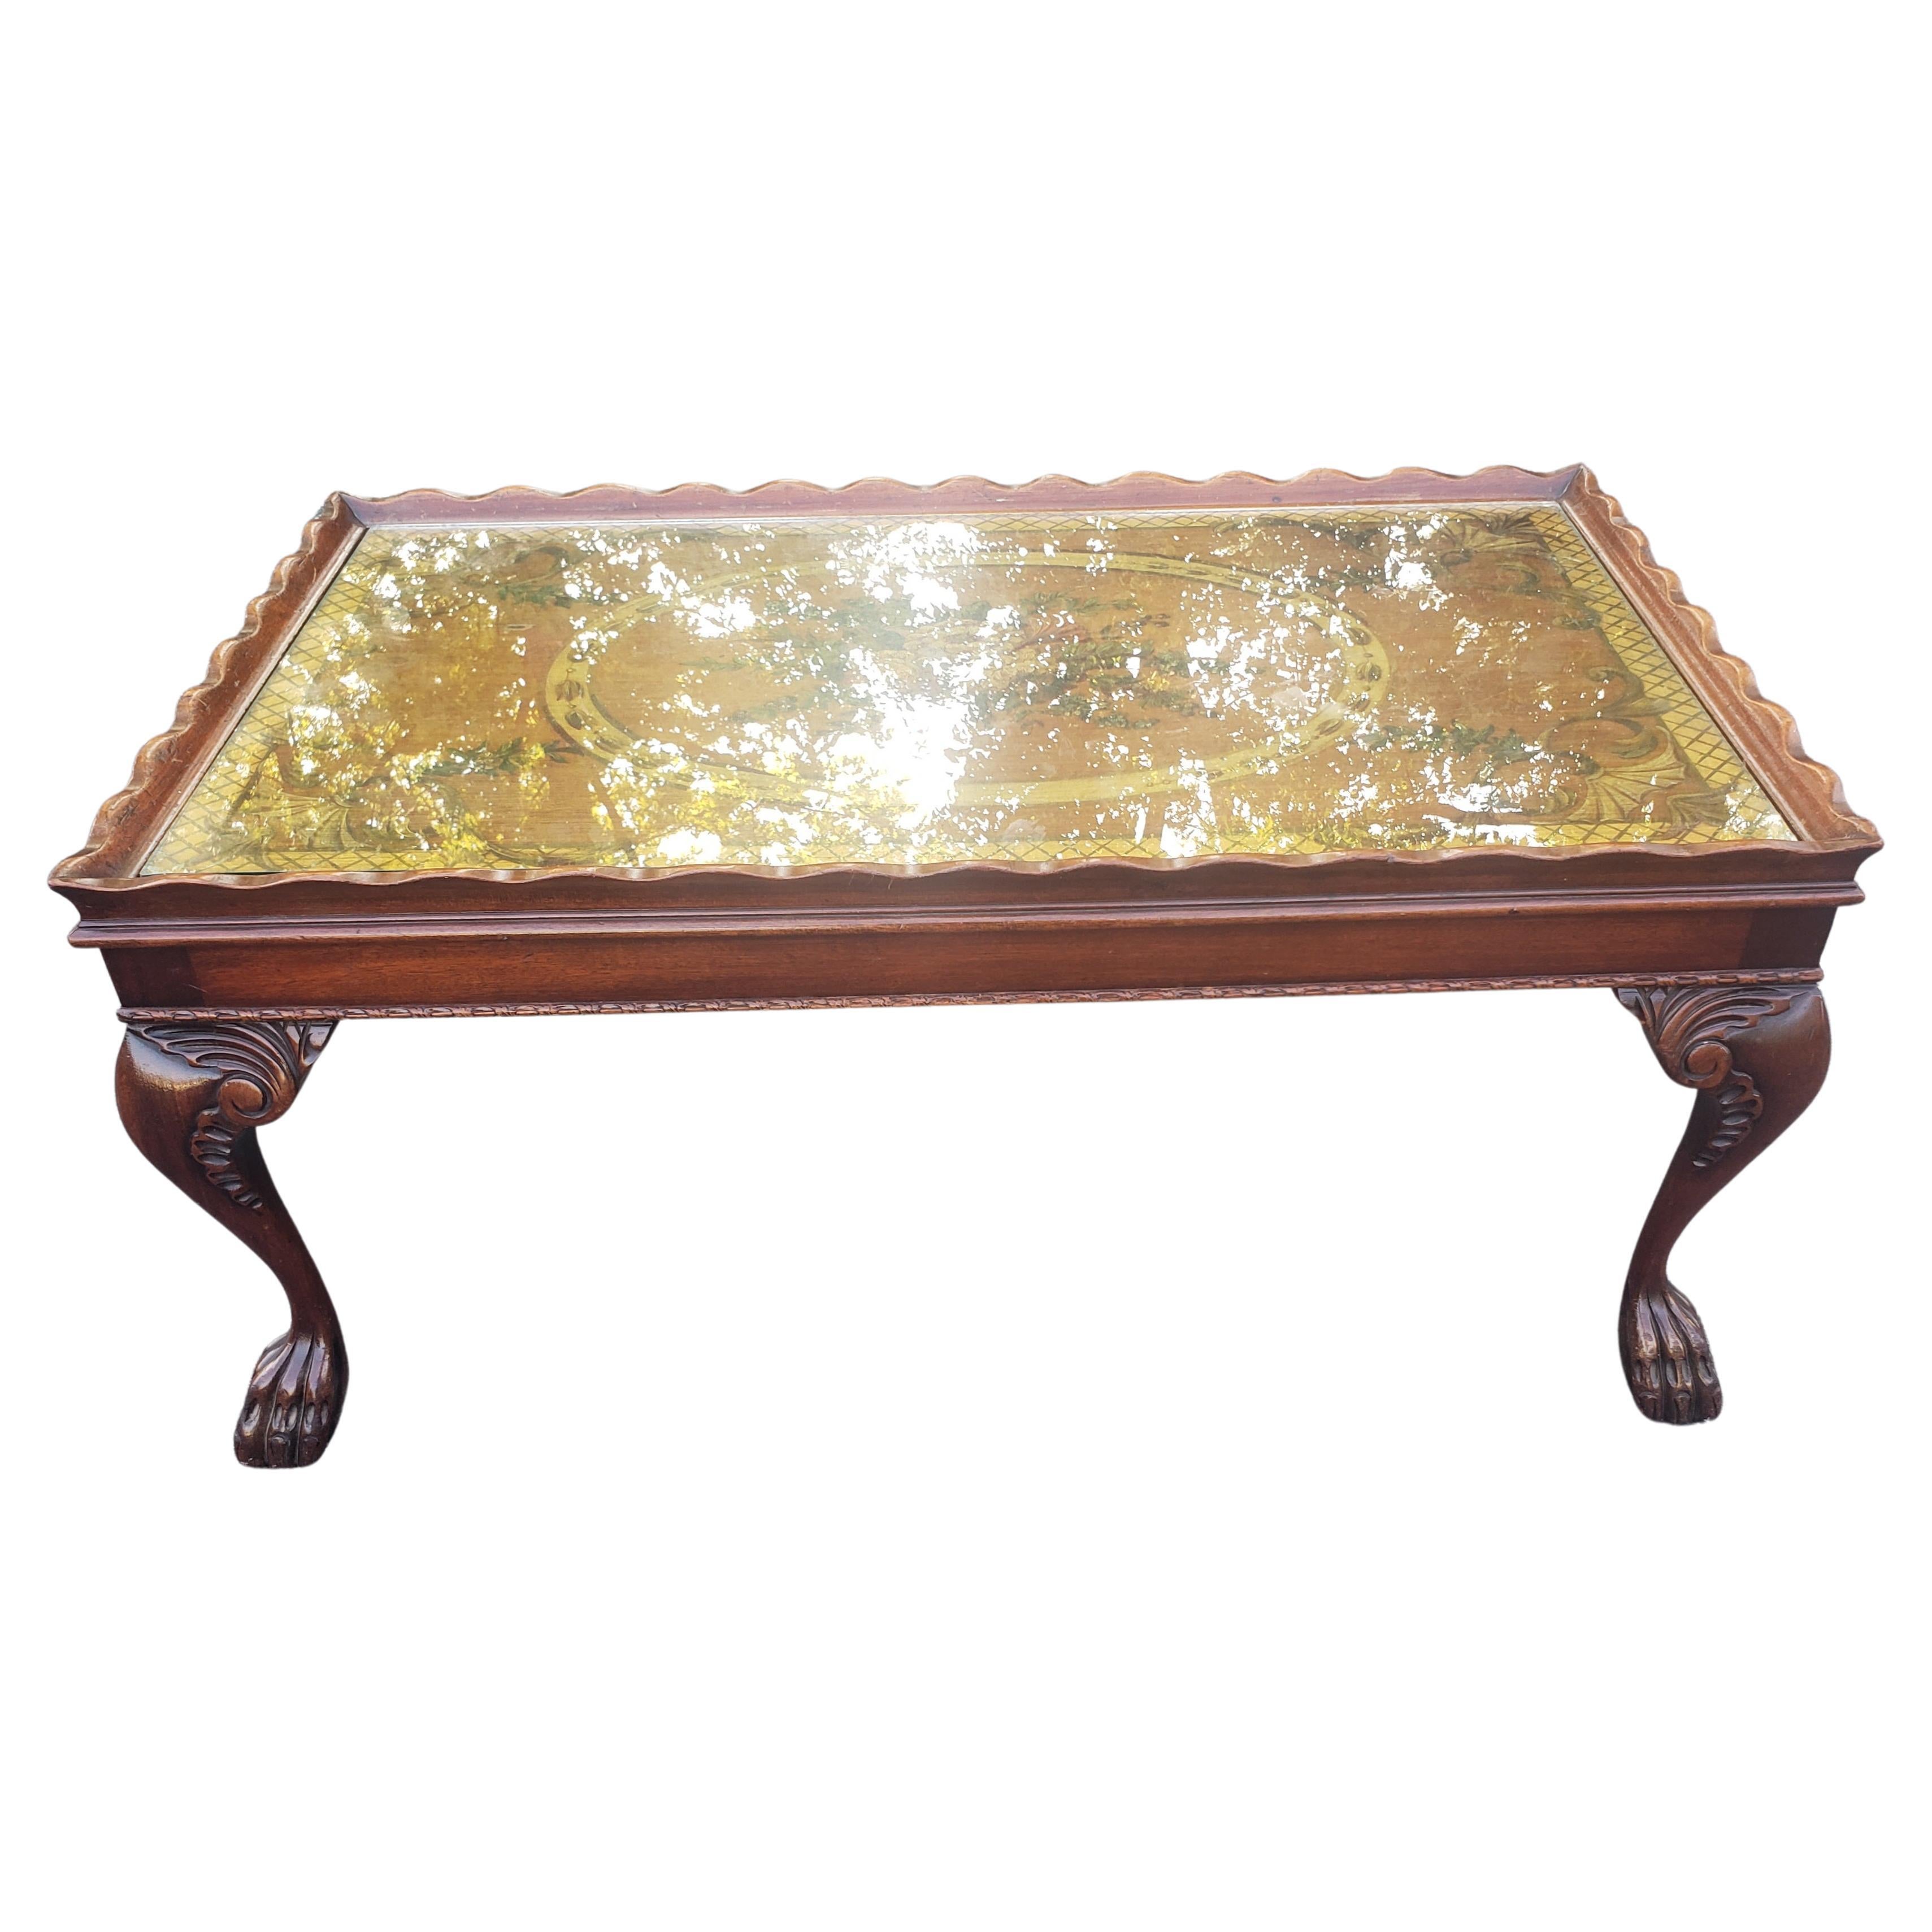 1940s Georgian style Floral Hand-Painted Top Mahogany Coffee Table with Protective Glass top and paw feet. Newer hand painted decorated top. 
Measures 36